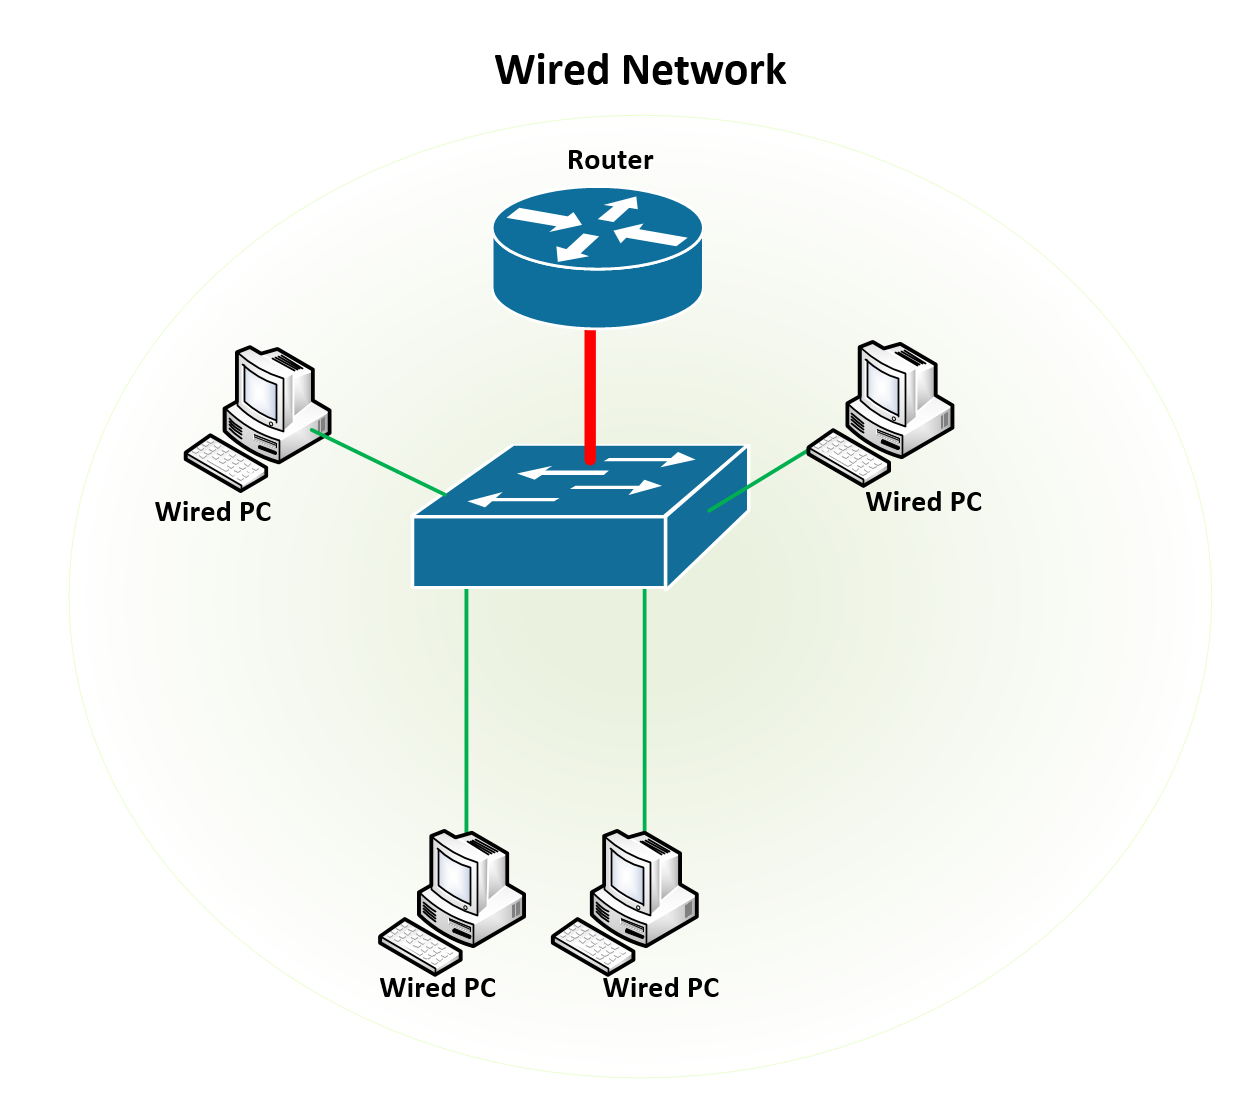 Wired Network. Беспроводные сети. Wired and Wireless Networks. Сети маршрутизатор Интерфейс. Source connection connection